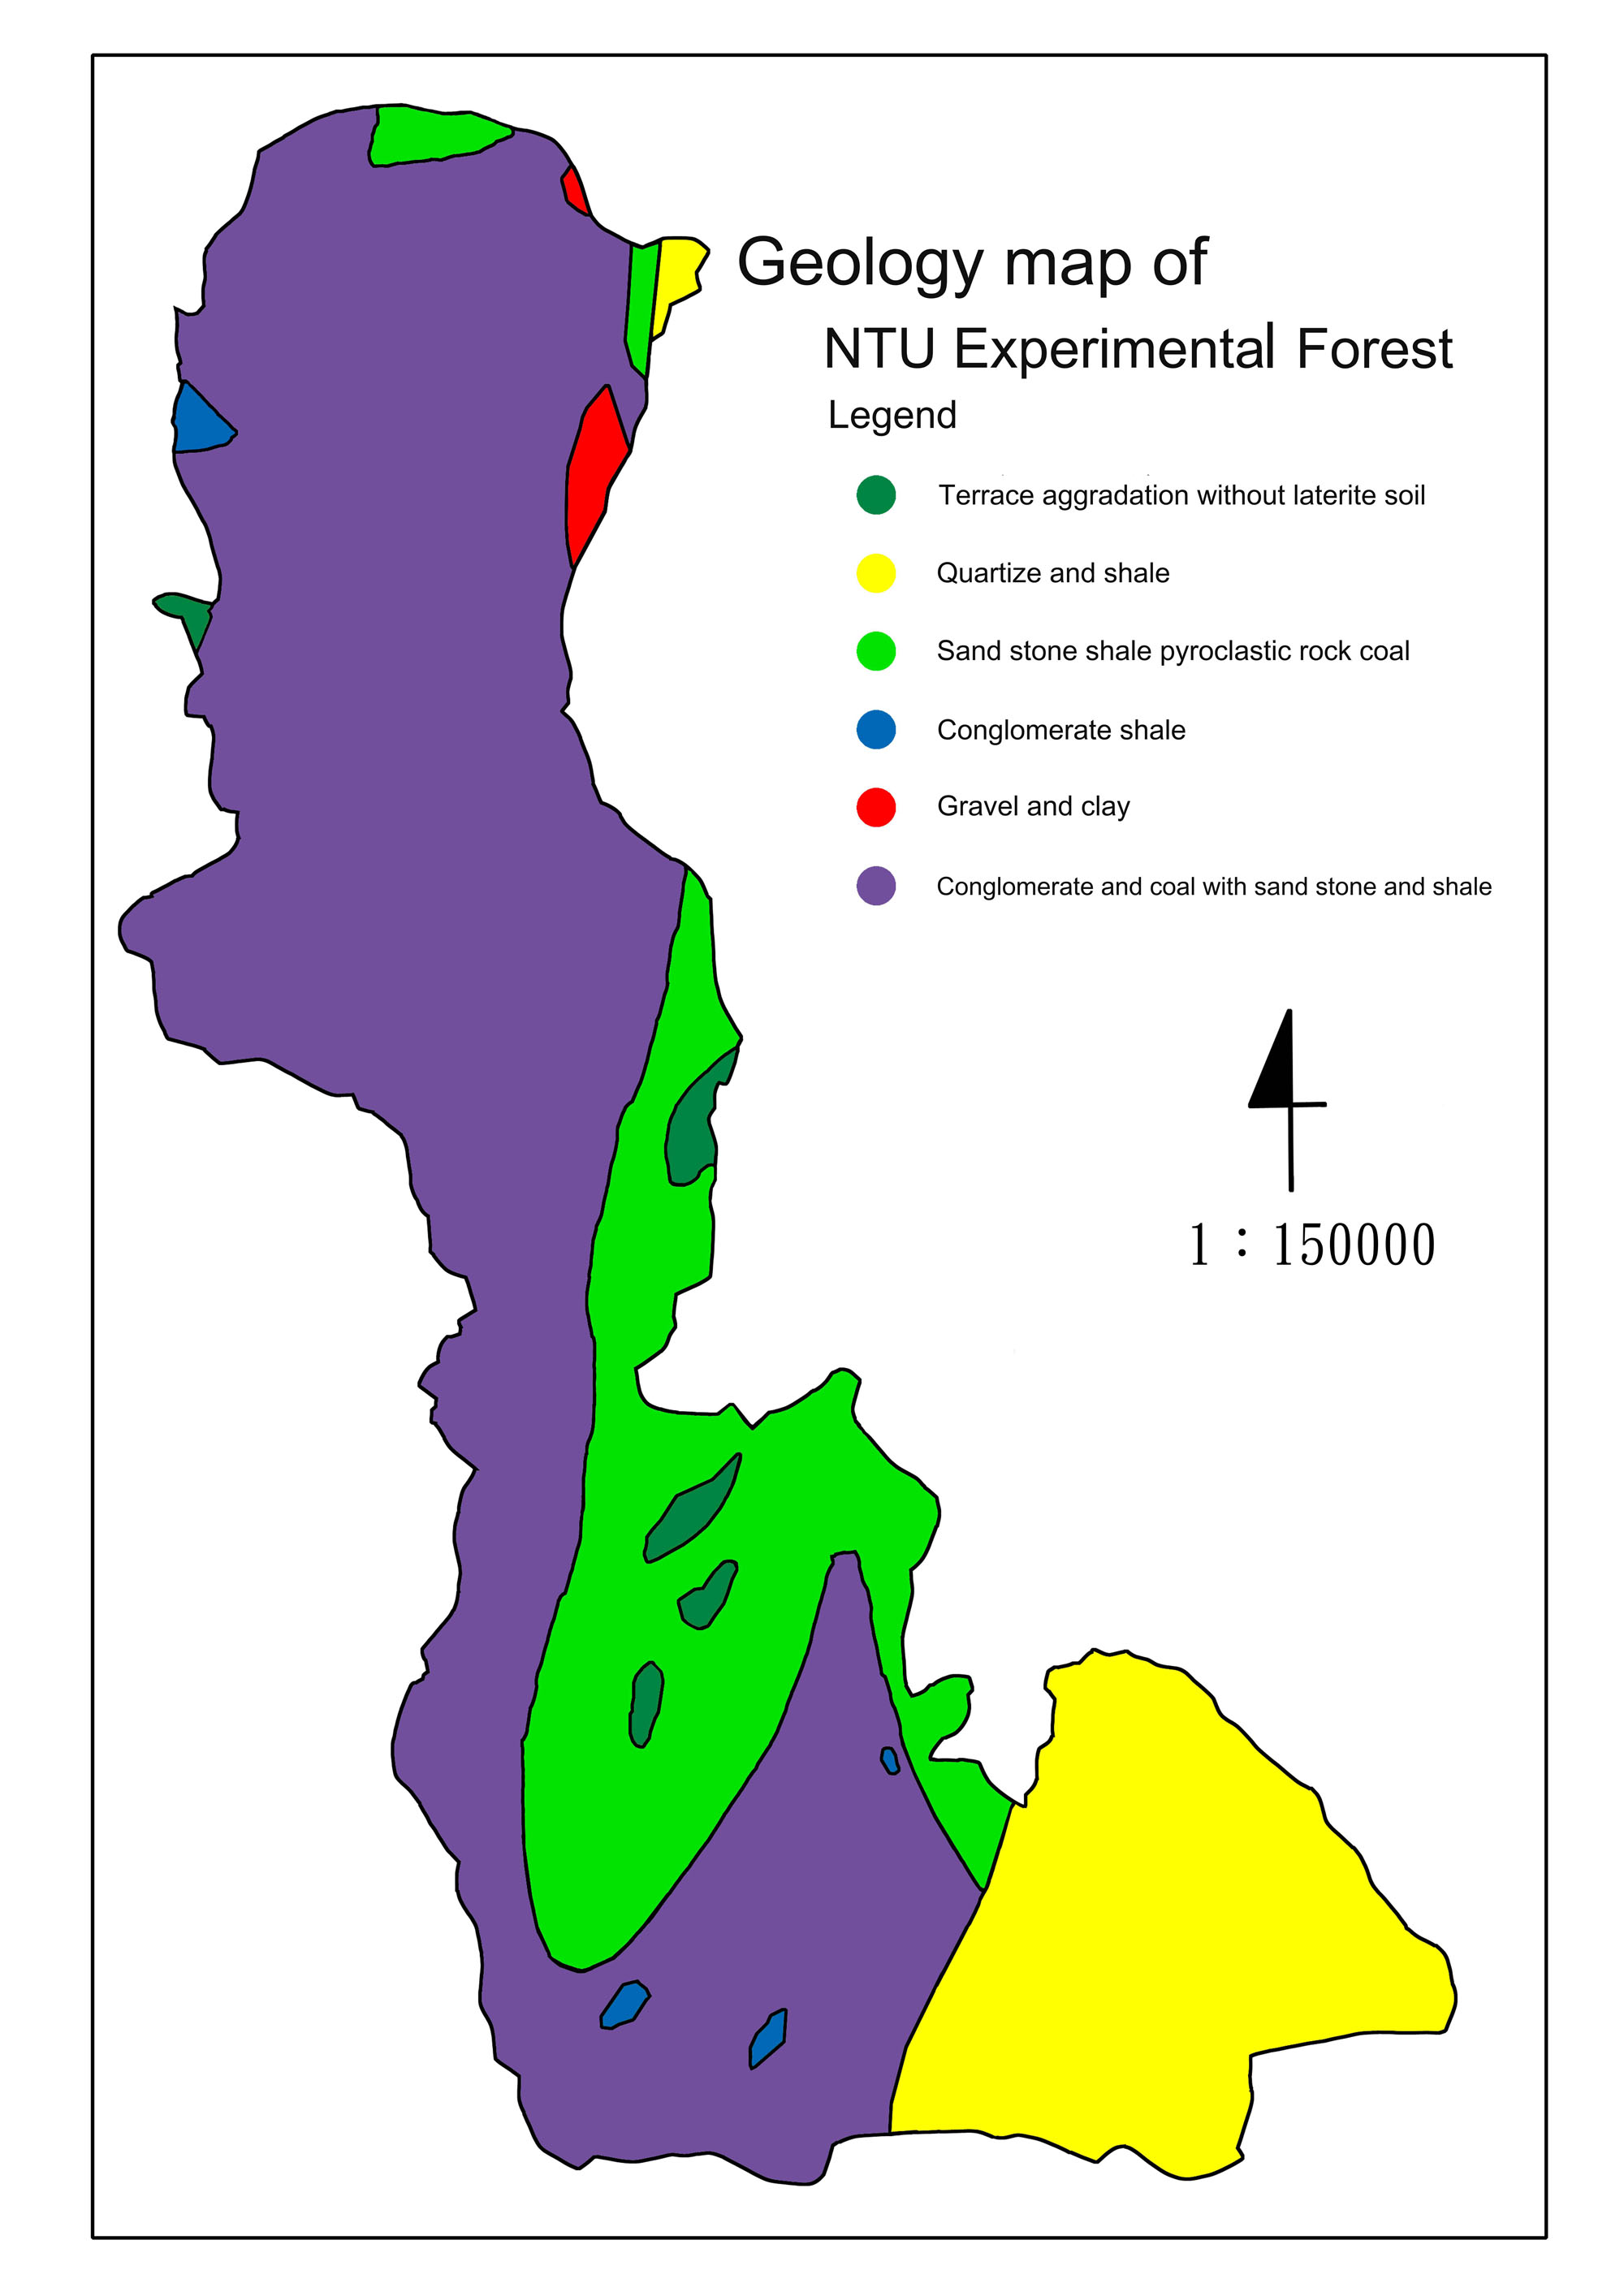 Geology map of NTU Experimental Forest